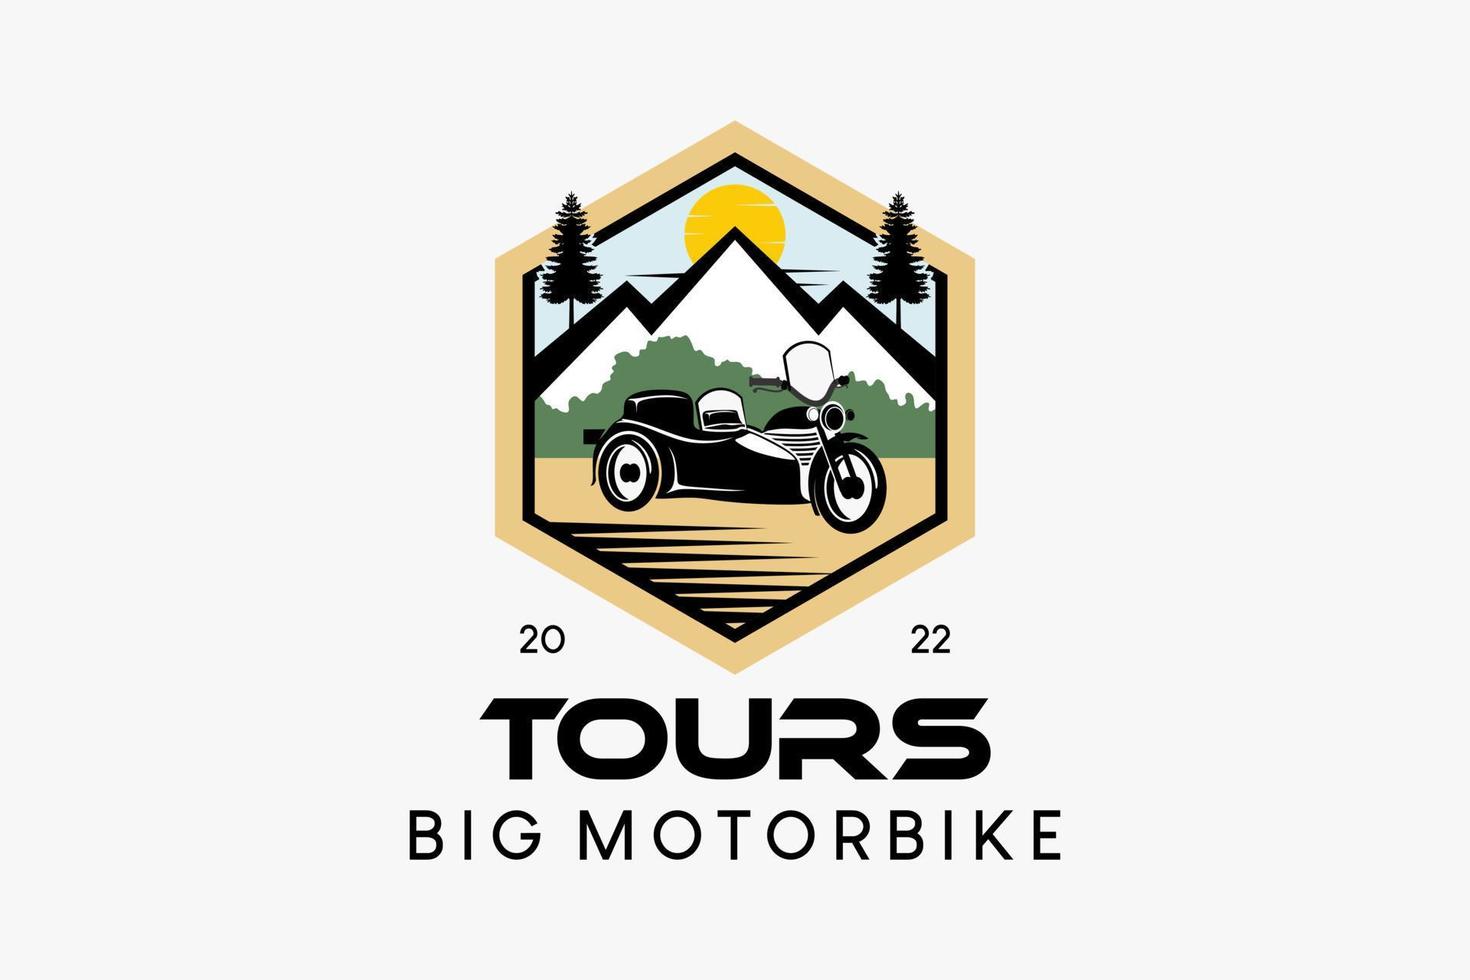 Big bike sidecar logo design for travel or adventure, big motorbike silhouette blended with nature in a hexagon vector